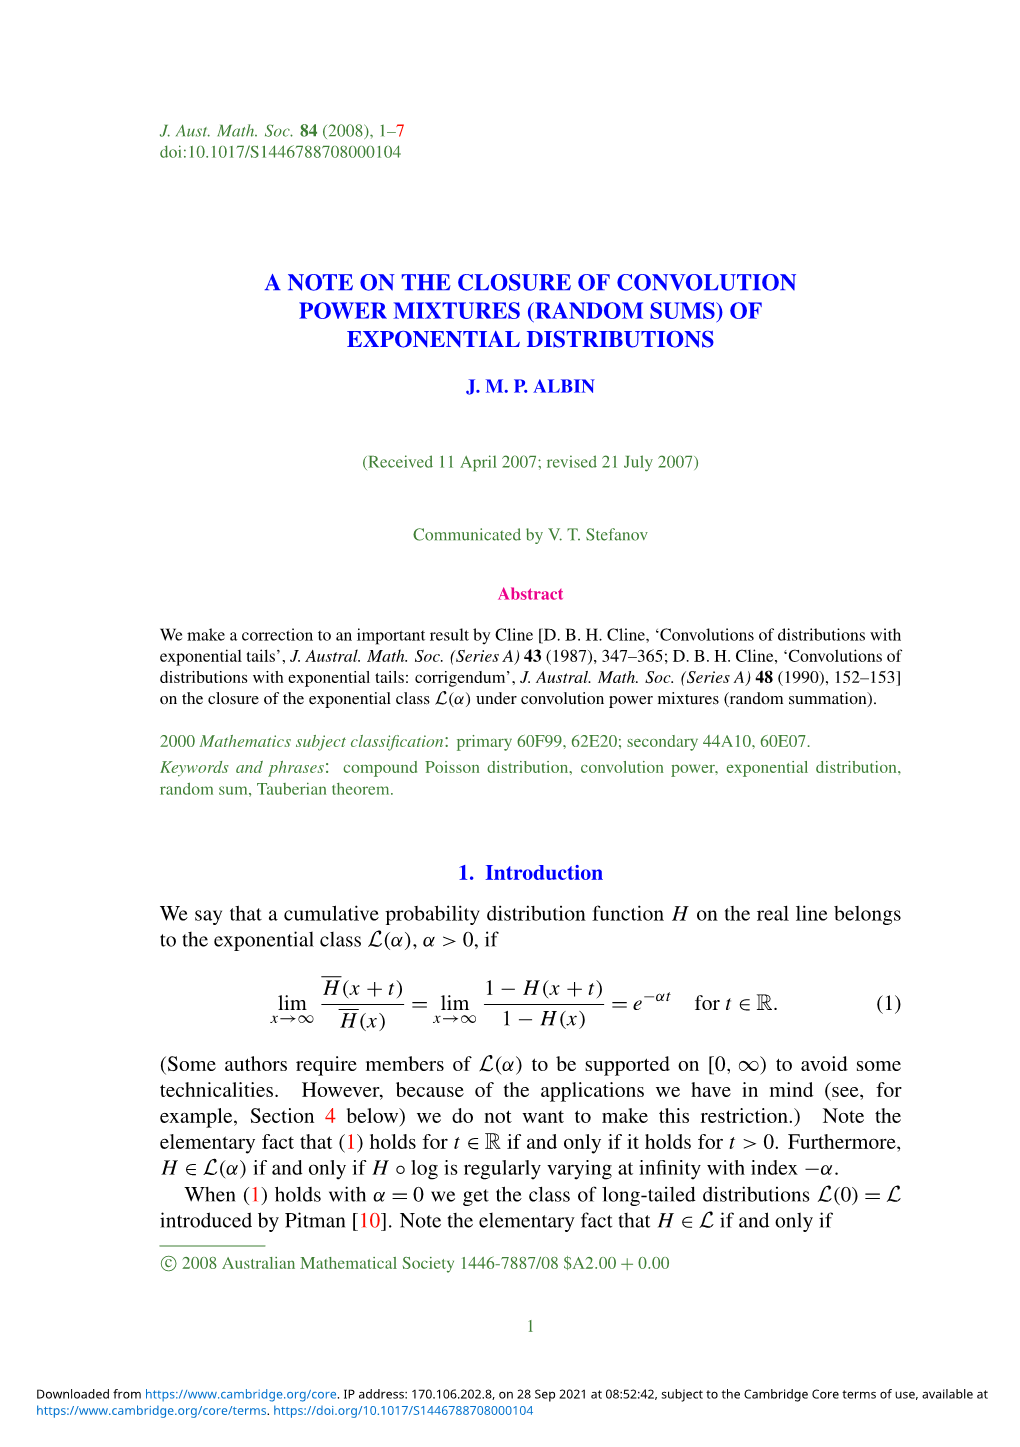 A Note on the Closure of Convolution Power Mixtures (Random Sums) of Exponential Distributions